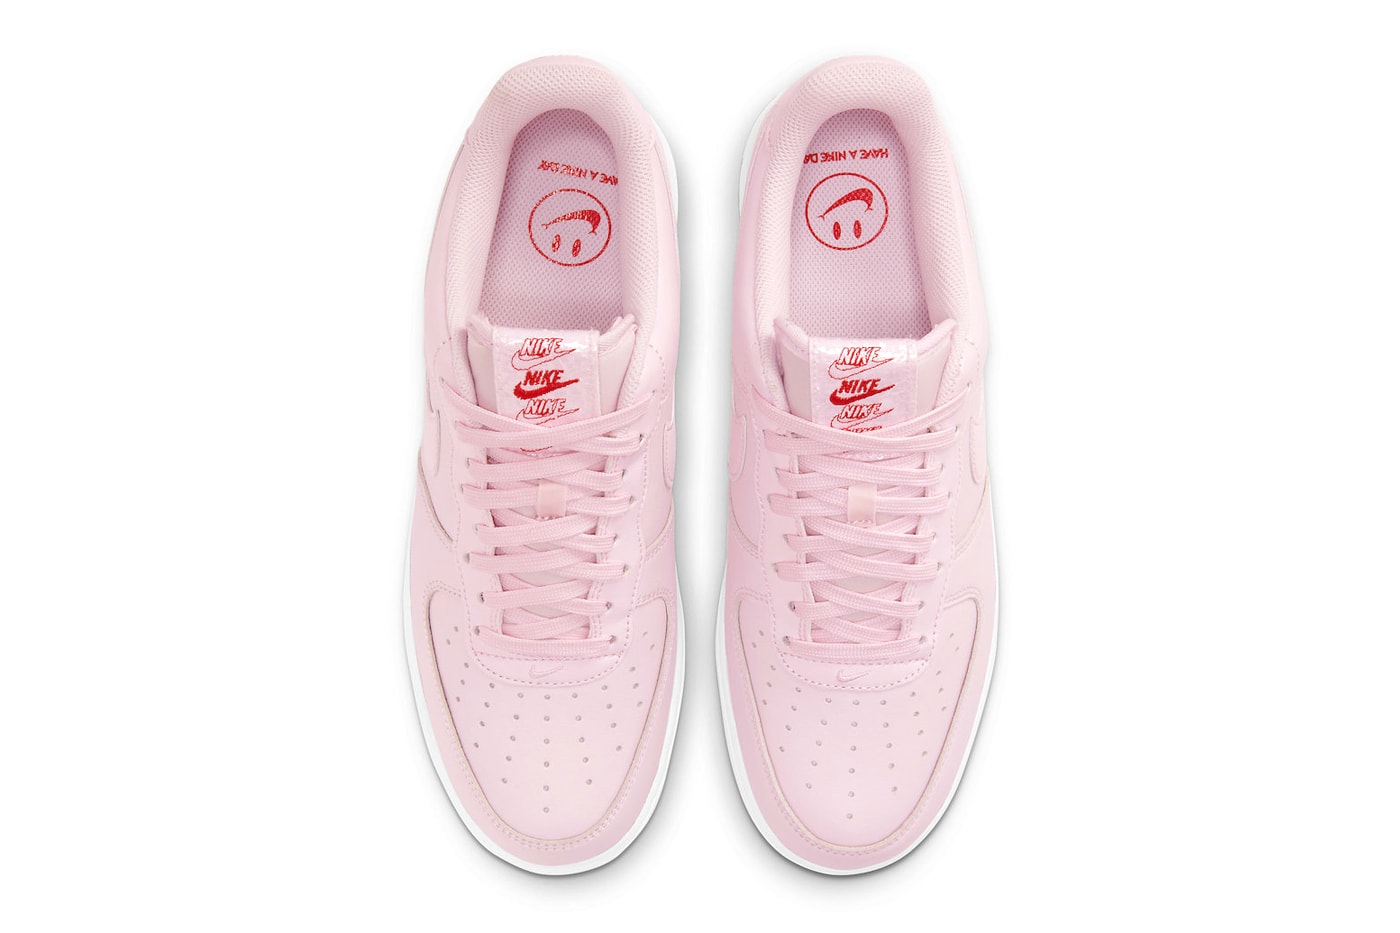 Nike からバレンタインムードを高める Air Force 1 “Rose”が再び登場 Nike Air Force 1 Low "Rose Pink" Restocks for the New Year 2024 january pink foam af1 low nike swoosh 